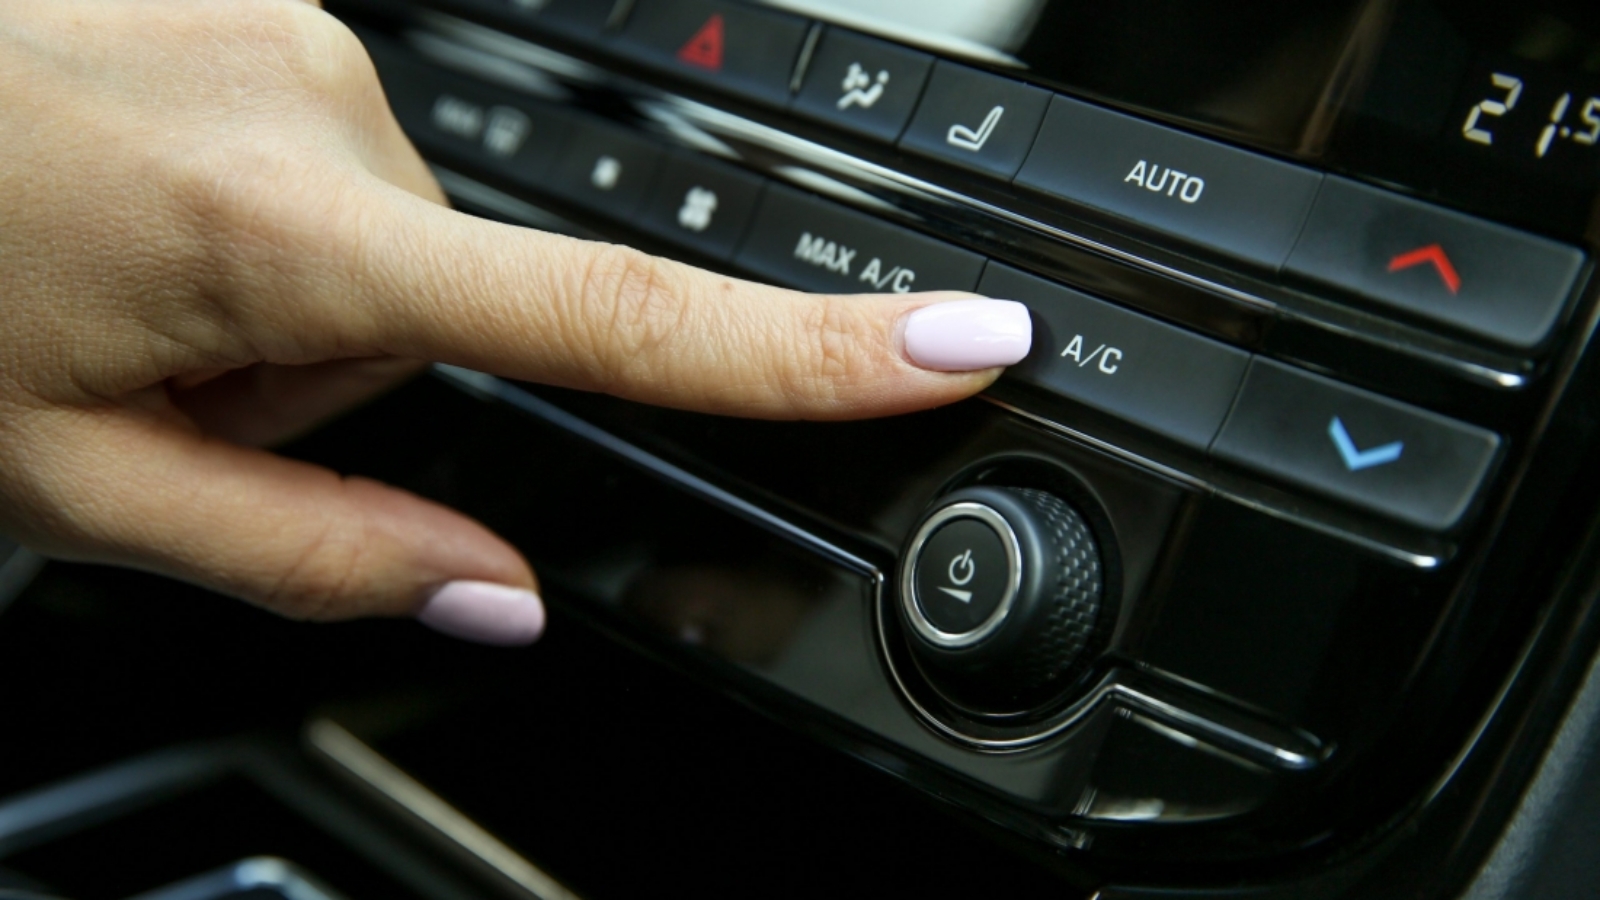 turning-turning-off-air-conditioner-car-close-up-scaled-1100x619